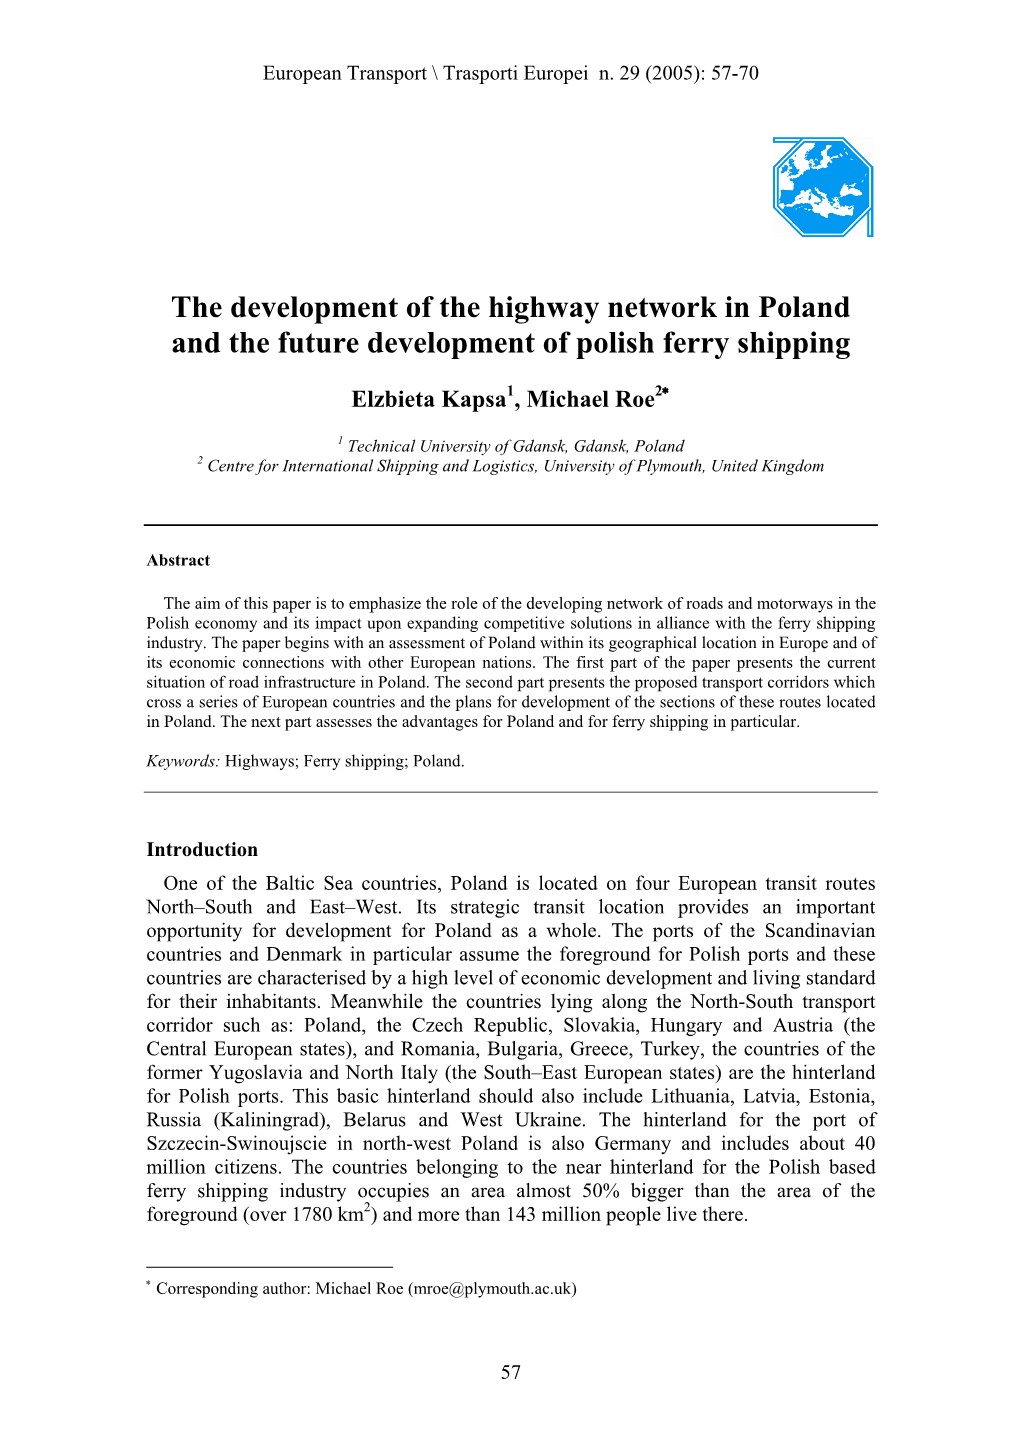 The Development of the Highway Network in Poland and the Future Development of Polish Ferry Shipping